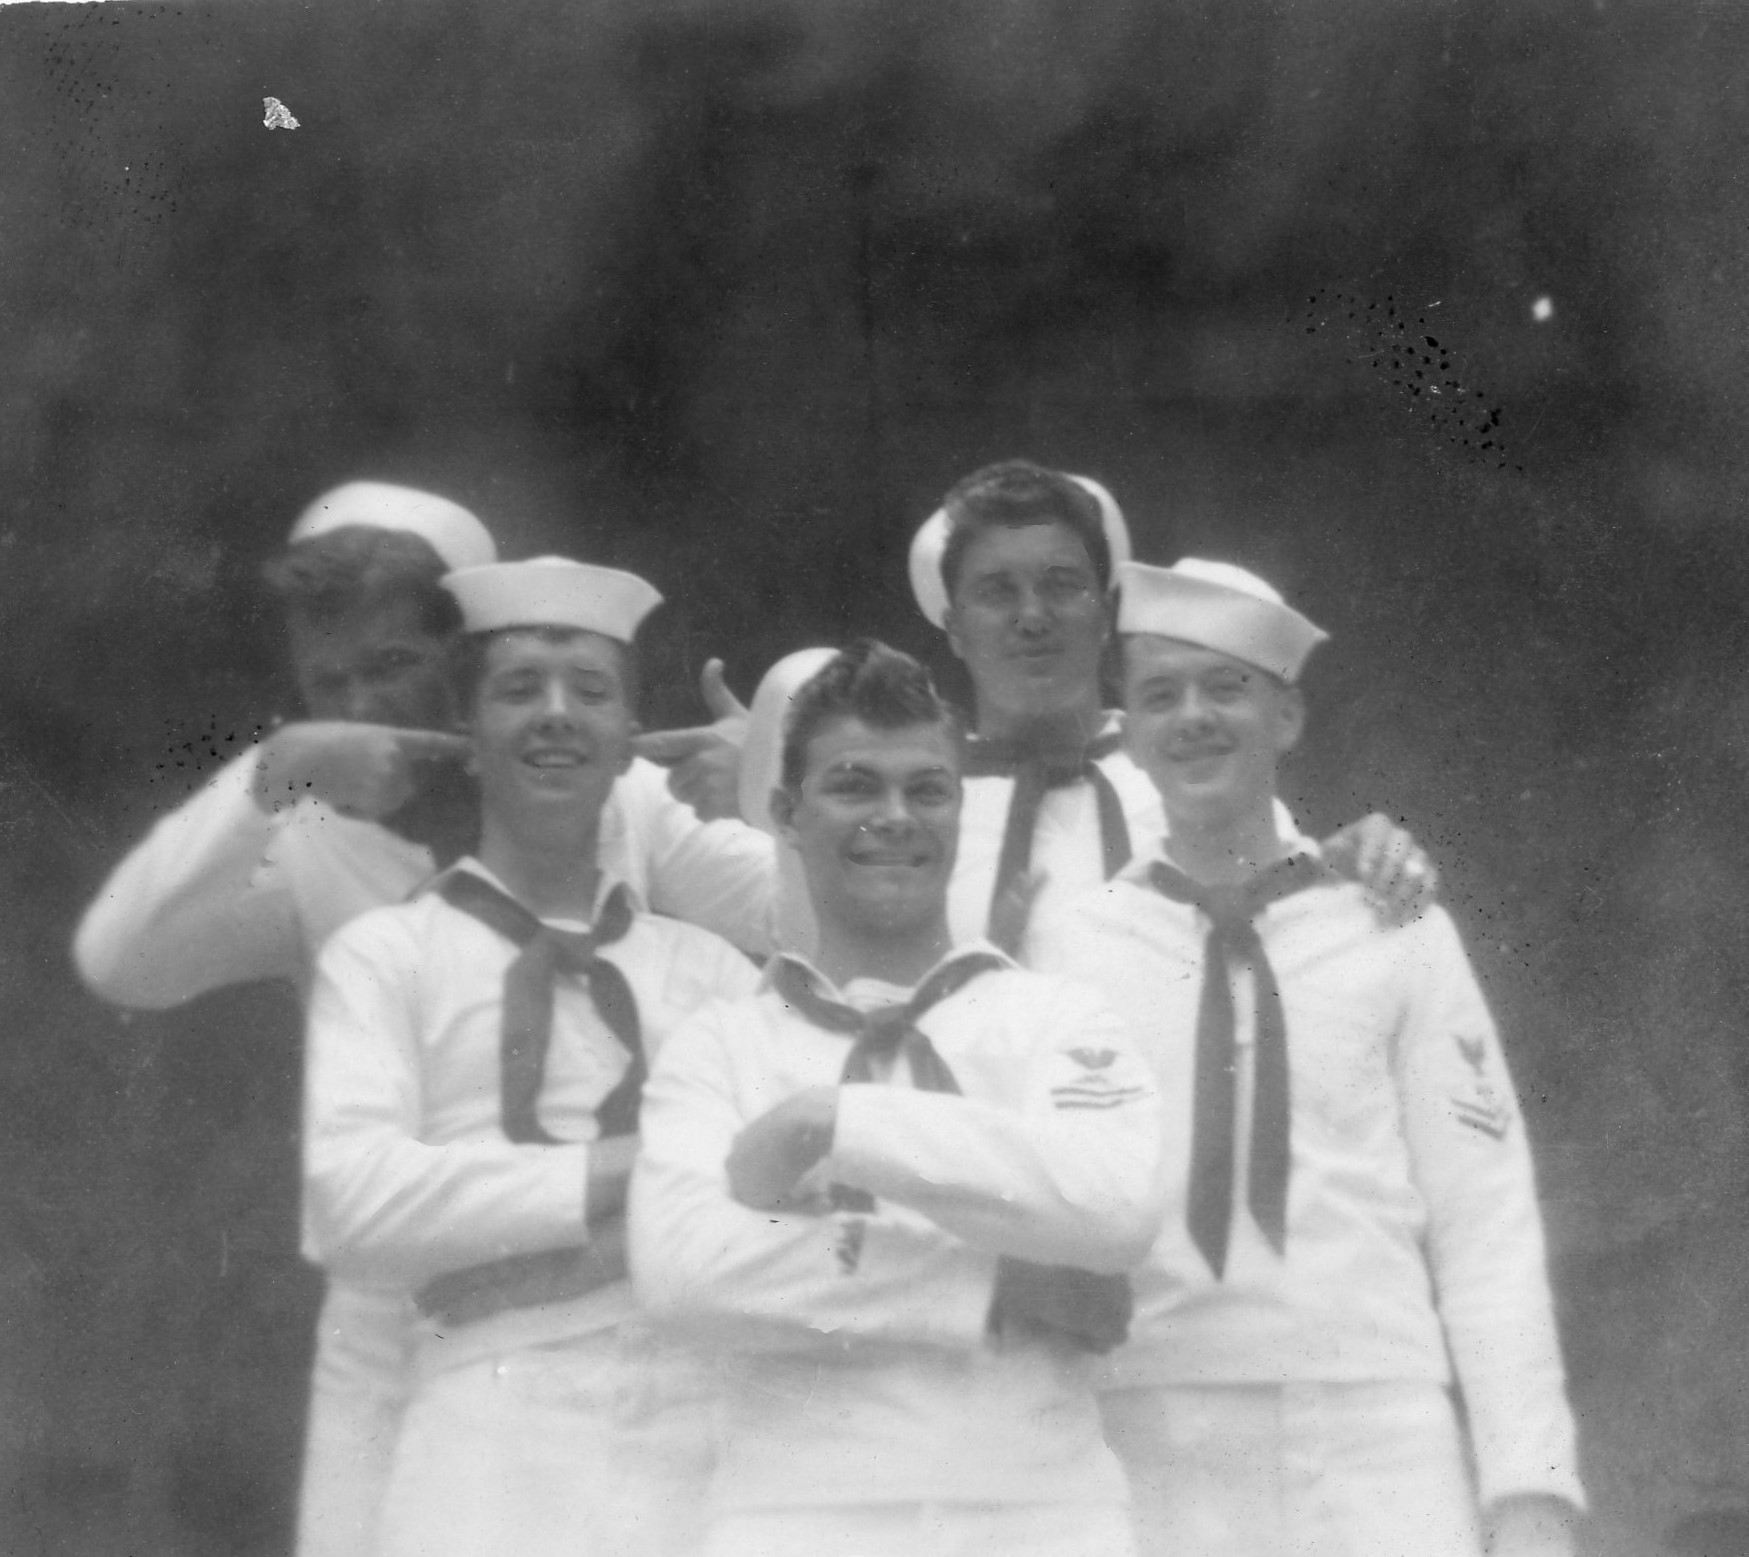 US Navy submariners, 1943-1945; they were likely crewmembers of USS Billfish, USS Bowfin, or USS Burrfish